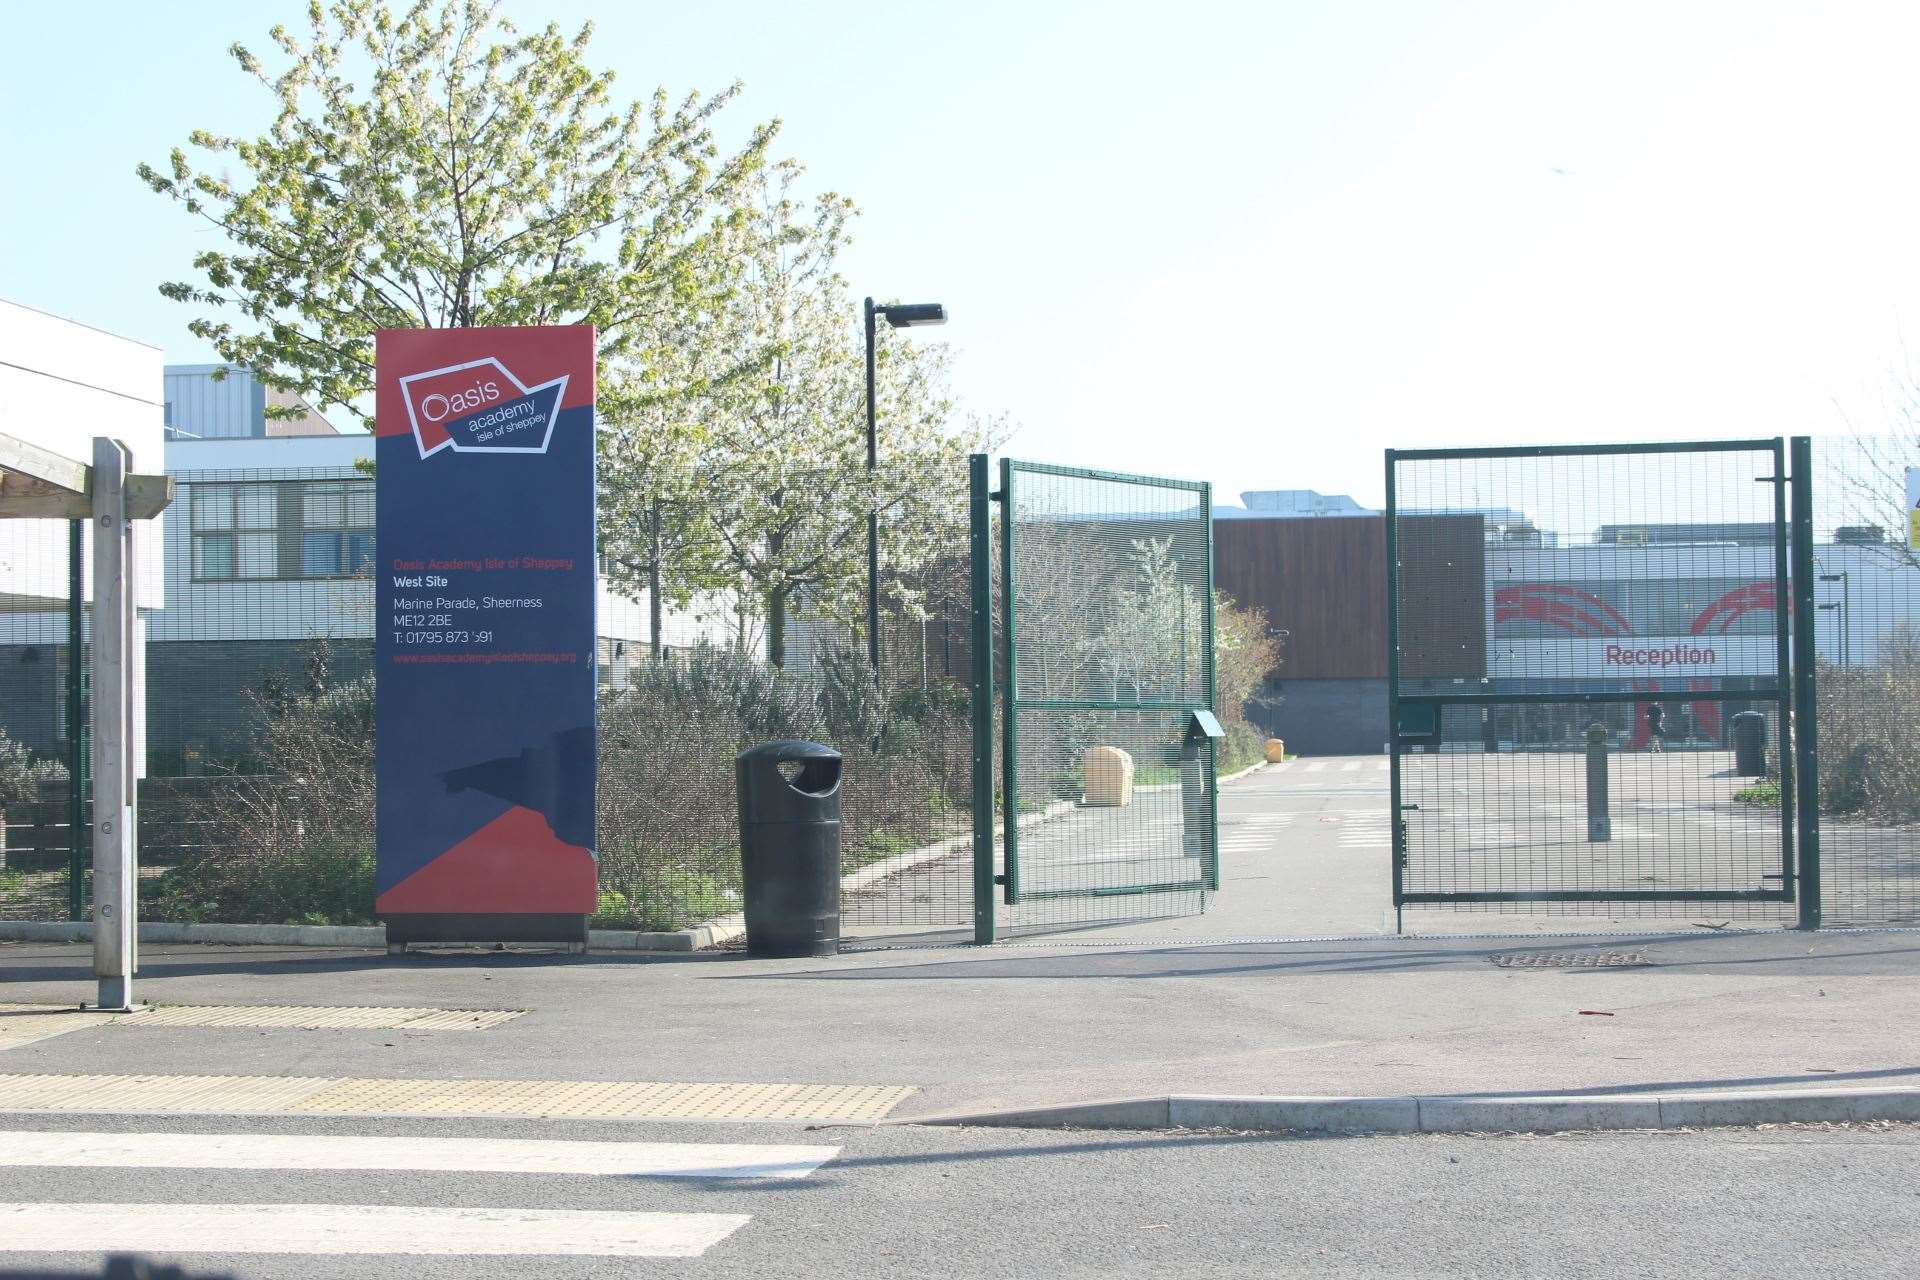 Sheerness campus of the Oasis Academy Isle of Sheppey